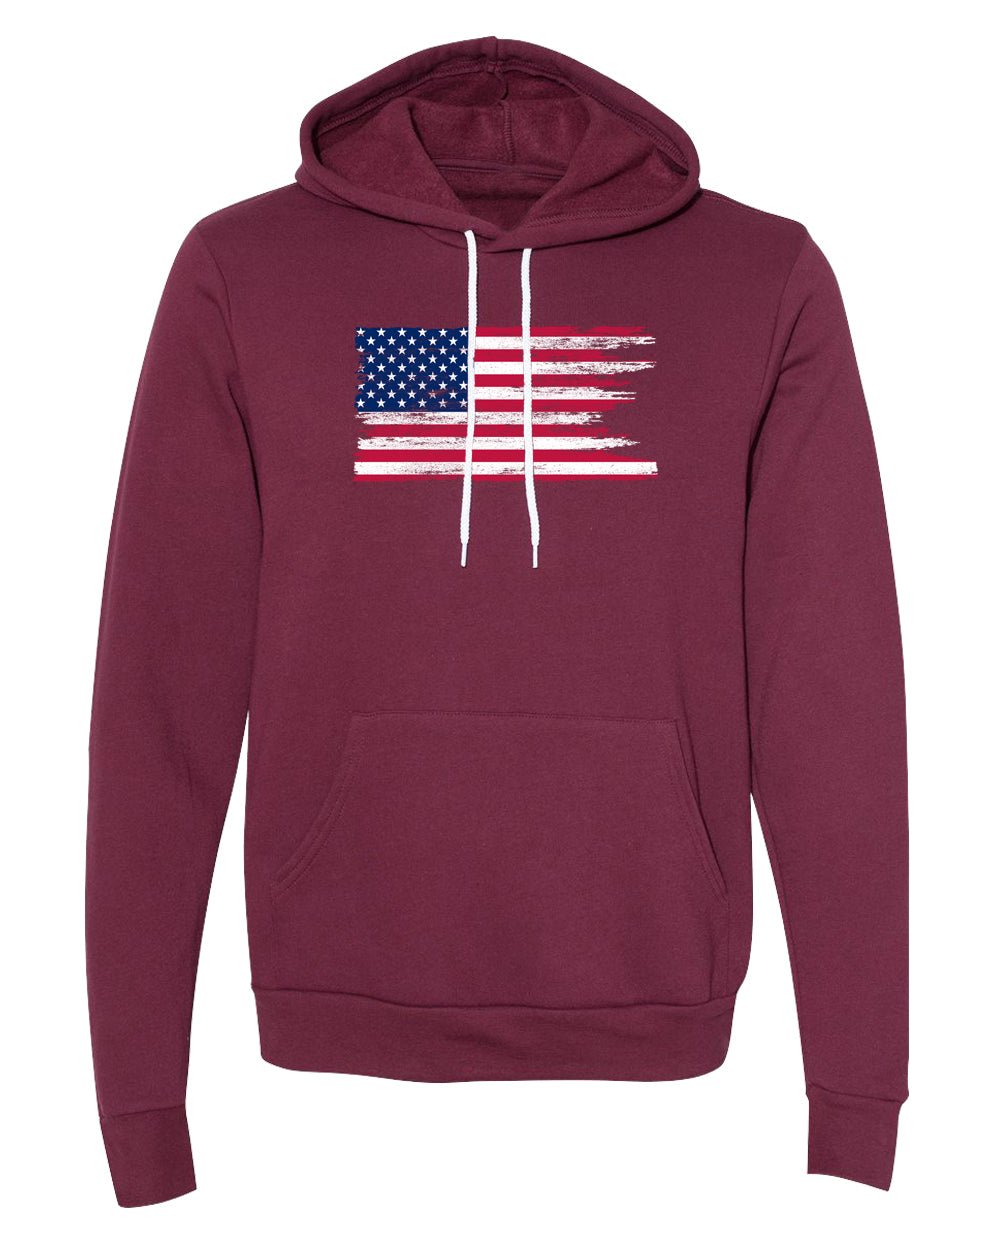 Distressed American Flag Unisex 4th of July Hoodies - Mato & Hash